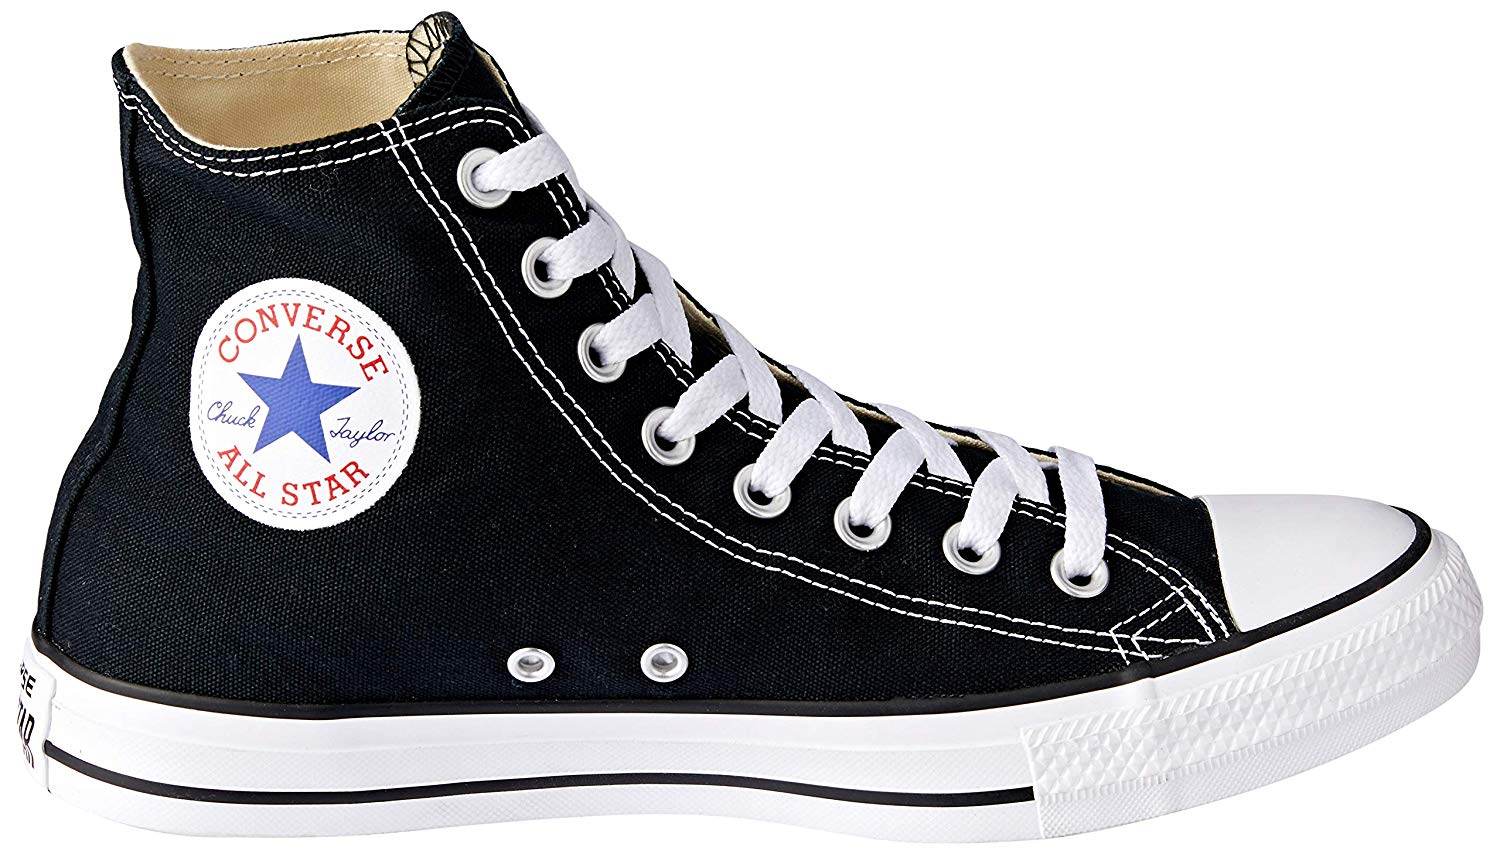 Converse Womens ctas hi Hight Top Lace Up Fashion Sneakers, Black, Size ...